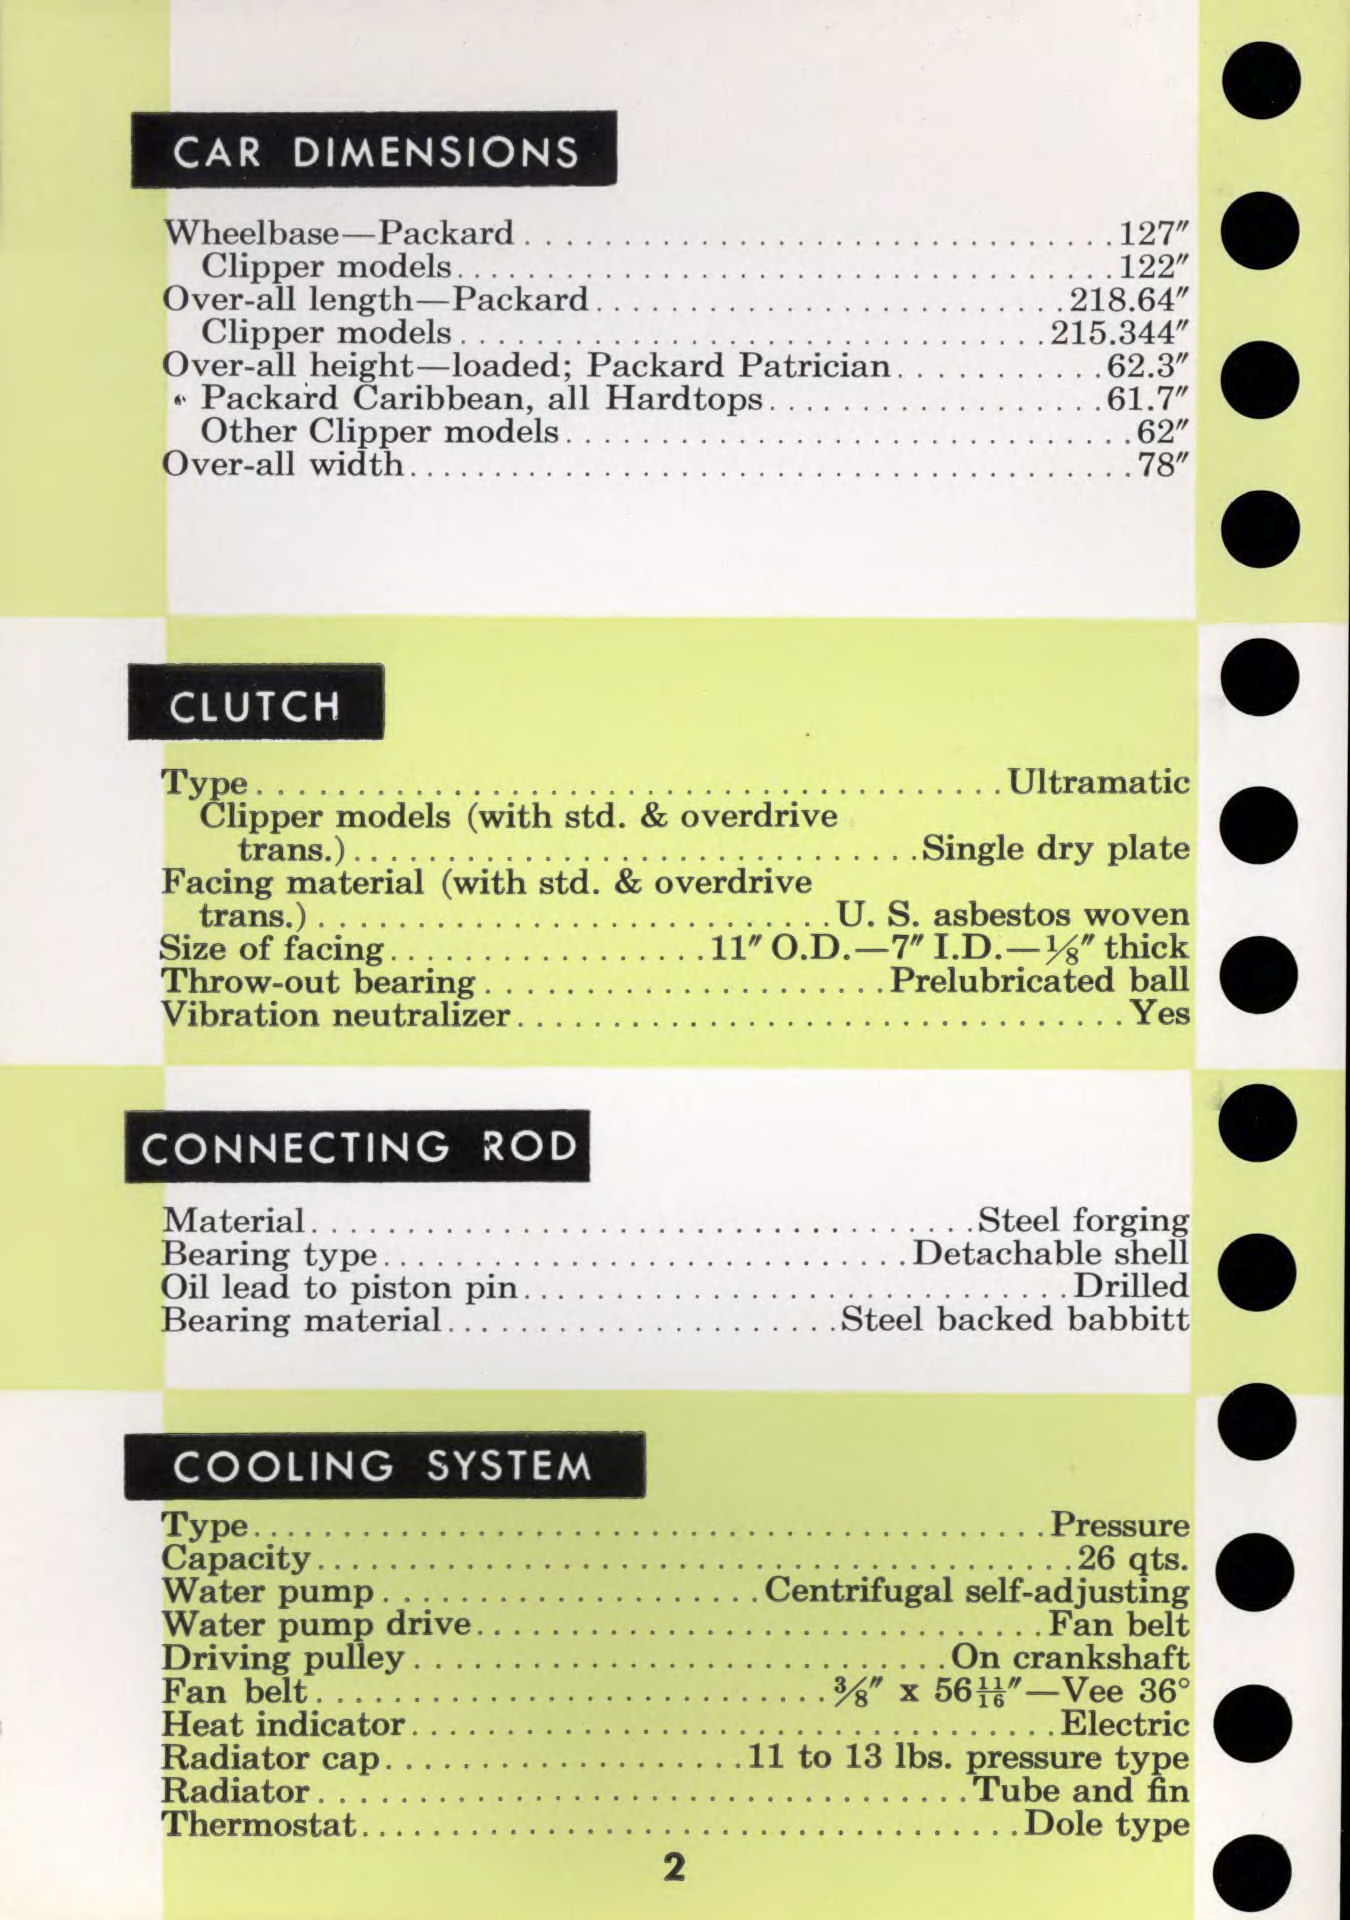 1956 Packard Data Book Page 90